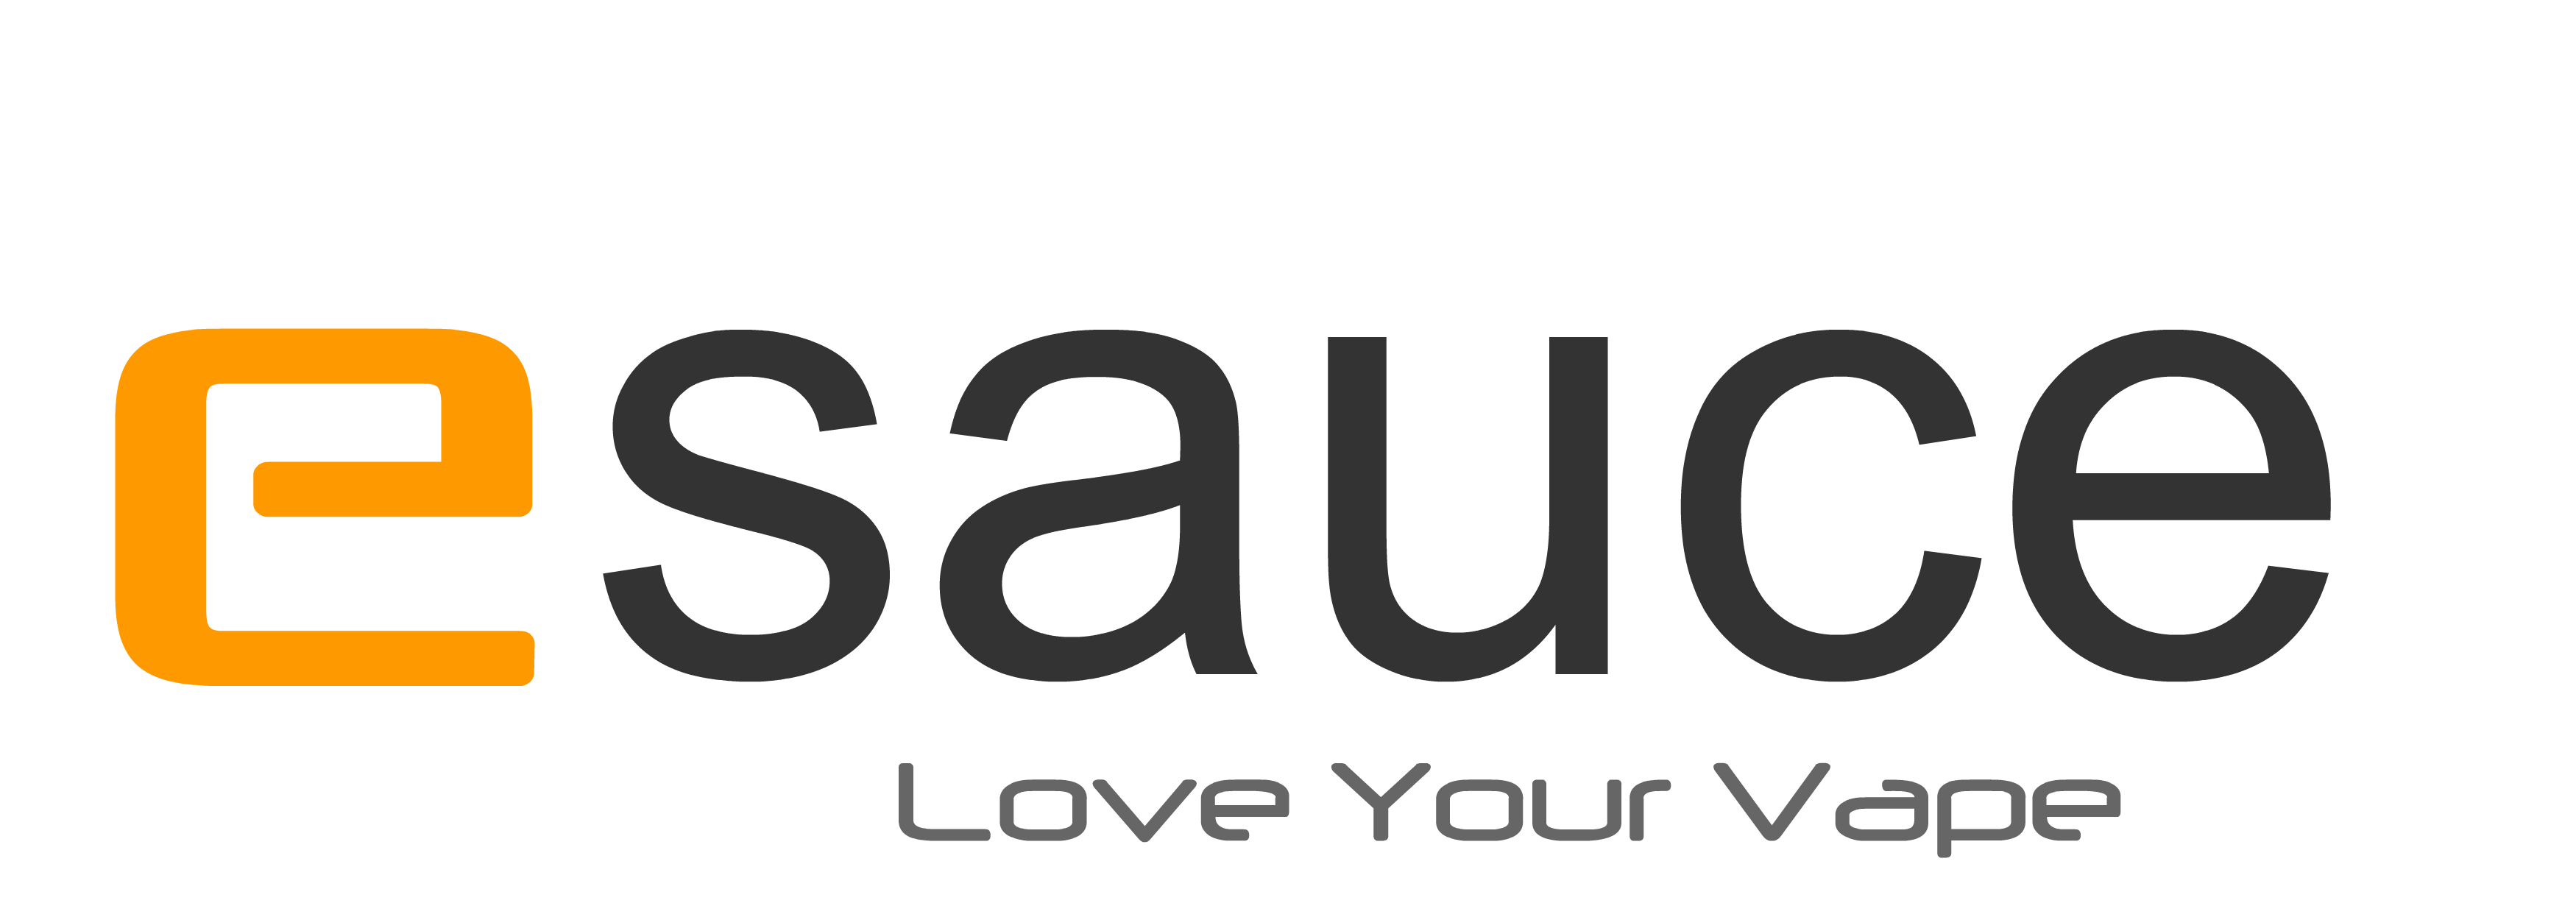 esauce logo no background 2.png